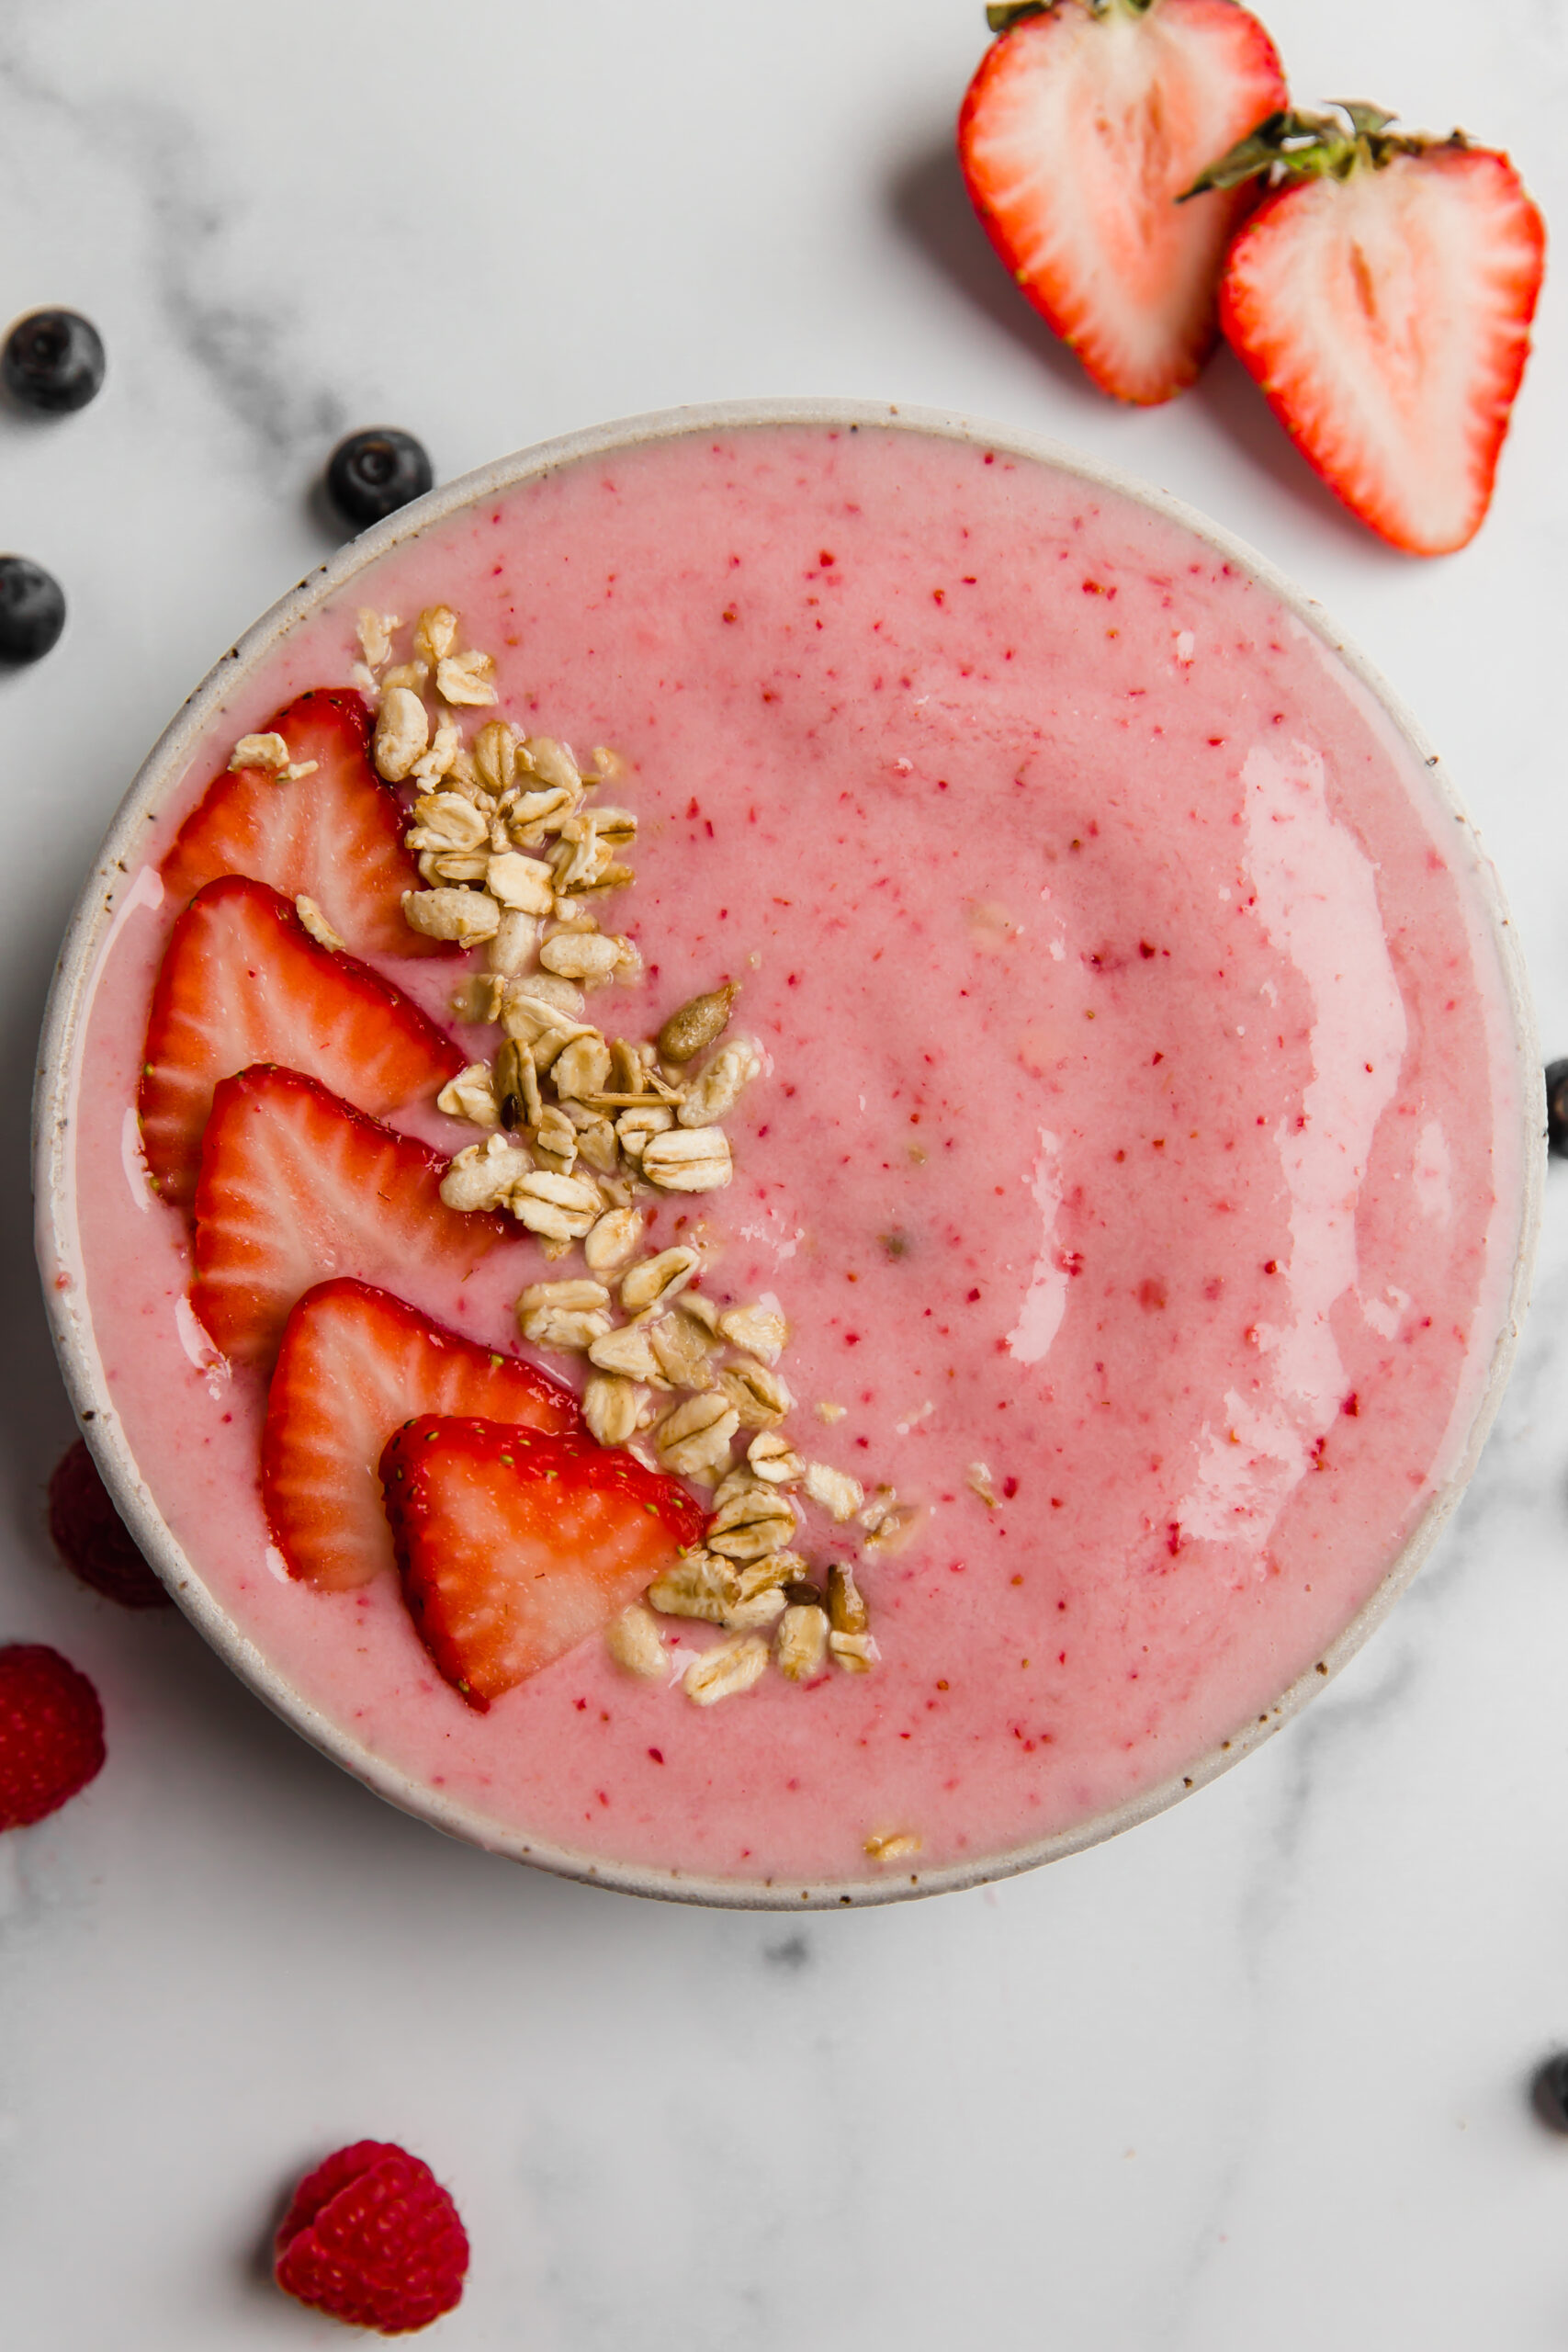 How to Make a Smoothie Thicker (Perfect for Thick Smoothie Bowls!)